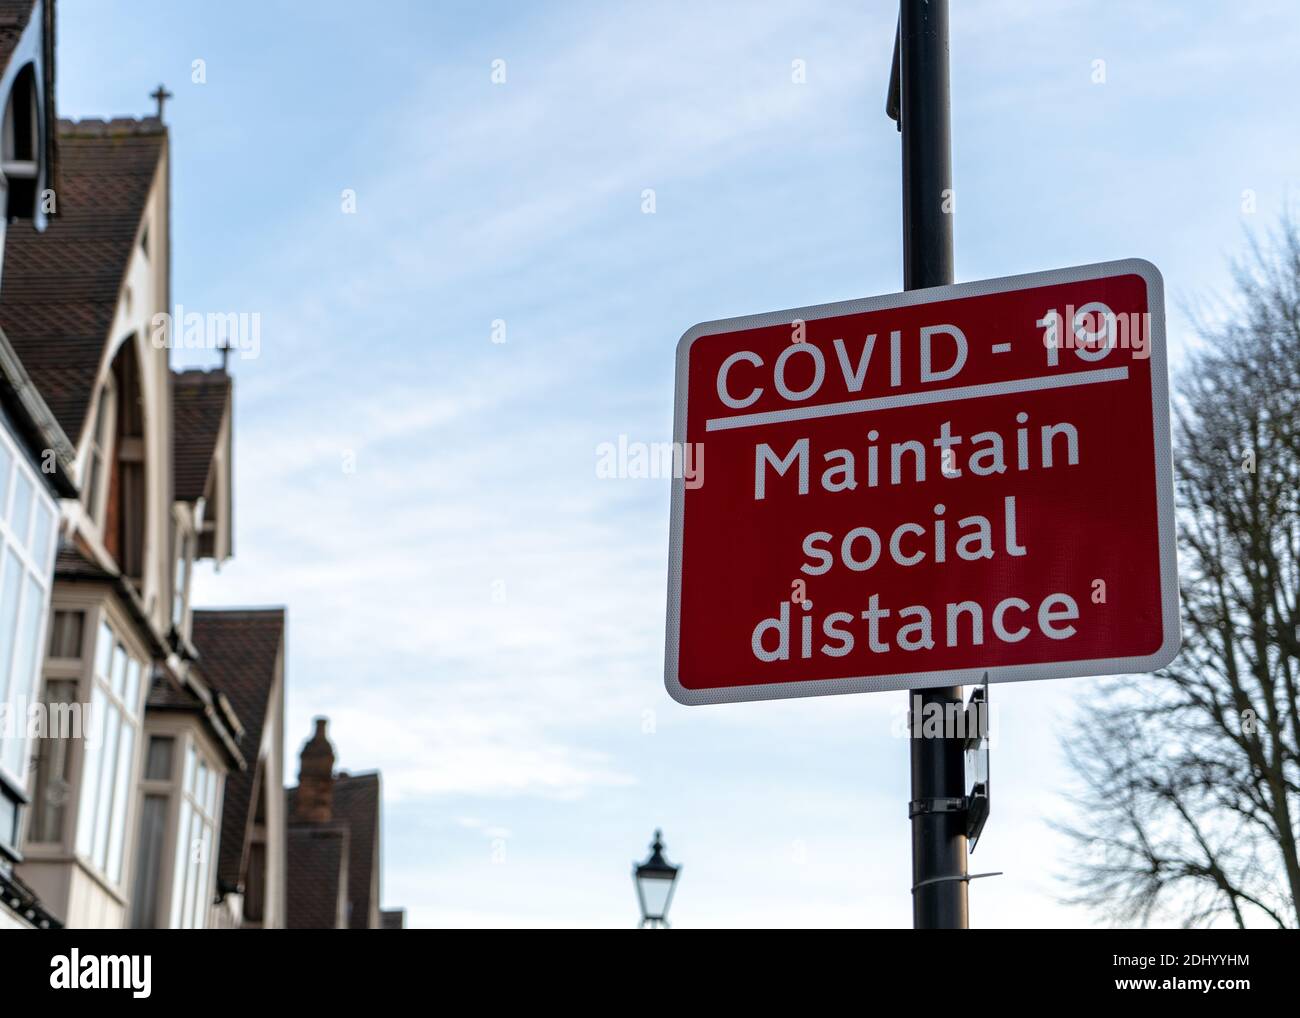 Solihull, United Kingdom - December 2020: Covid-19 Maintain Social Distance sign Stock Photo